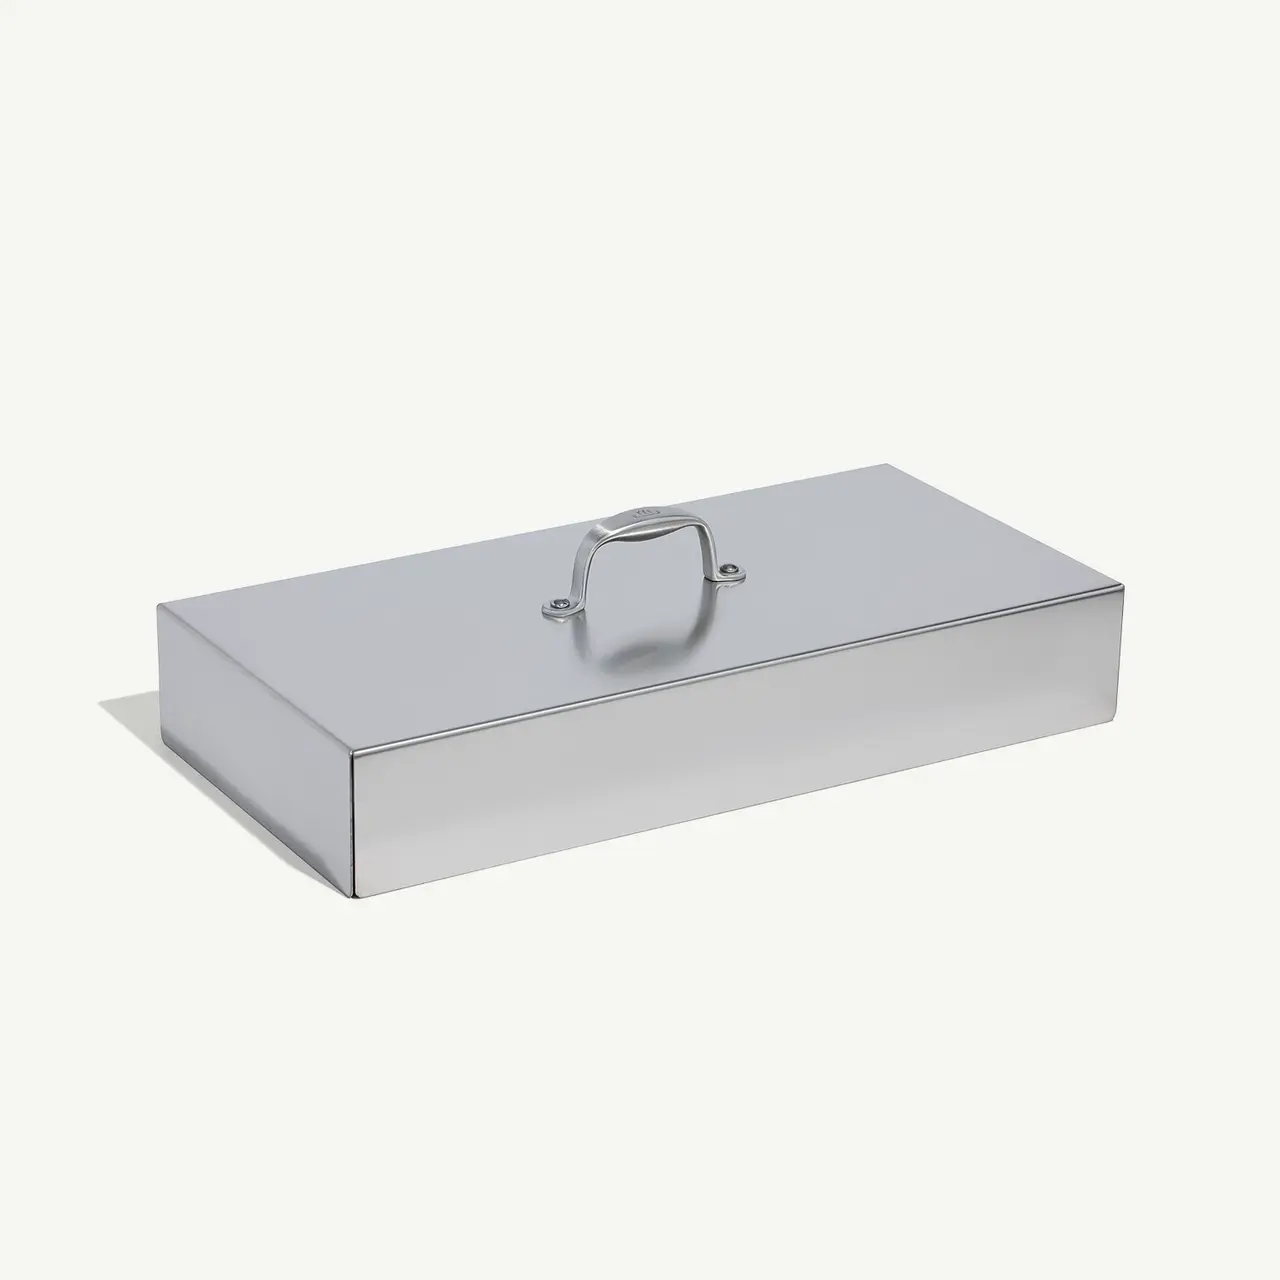 A gray rectangular tool box with a centered silver handle on a white background.